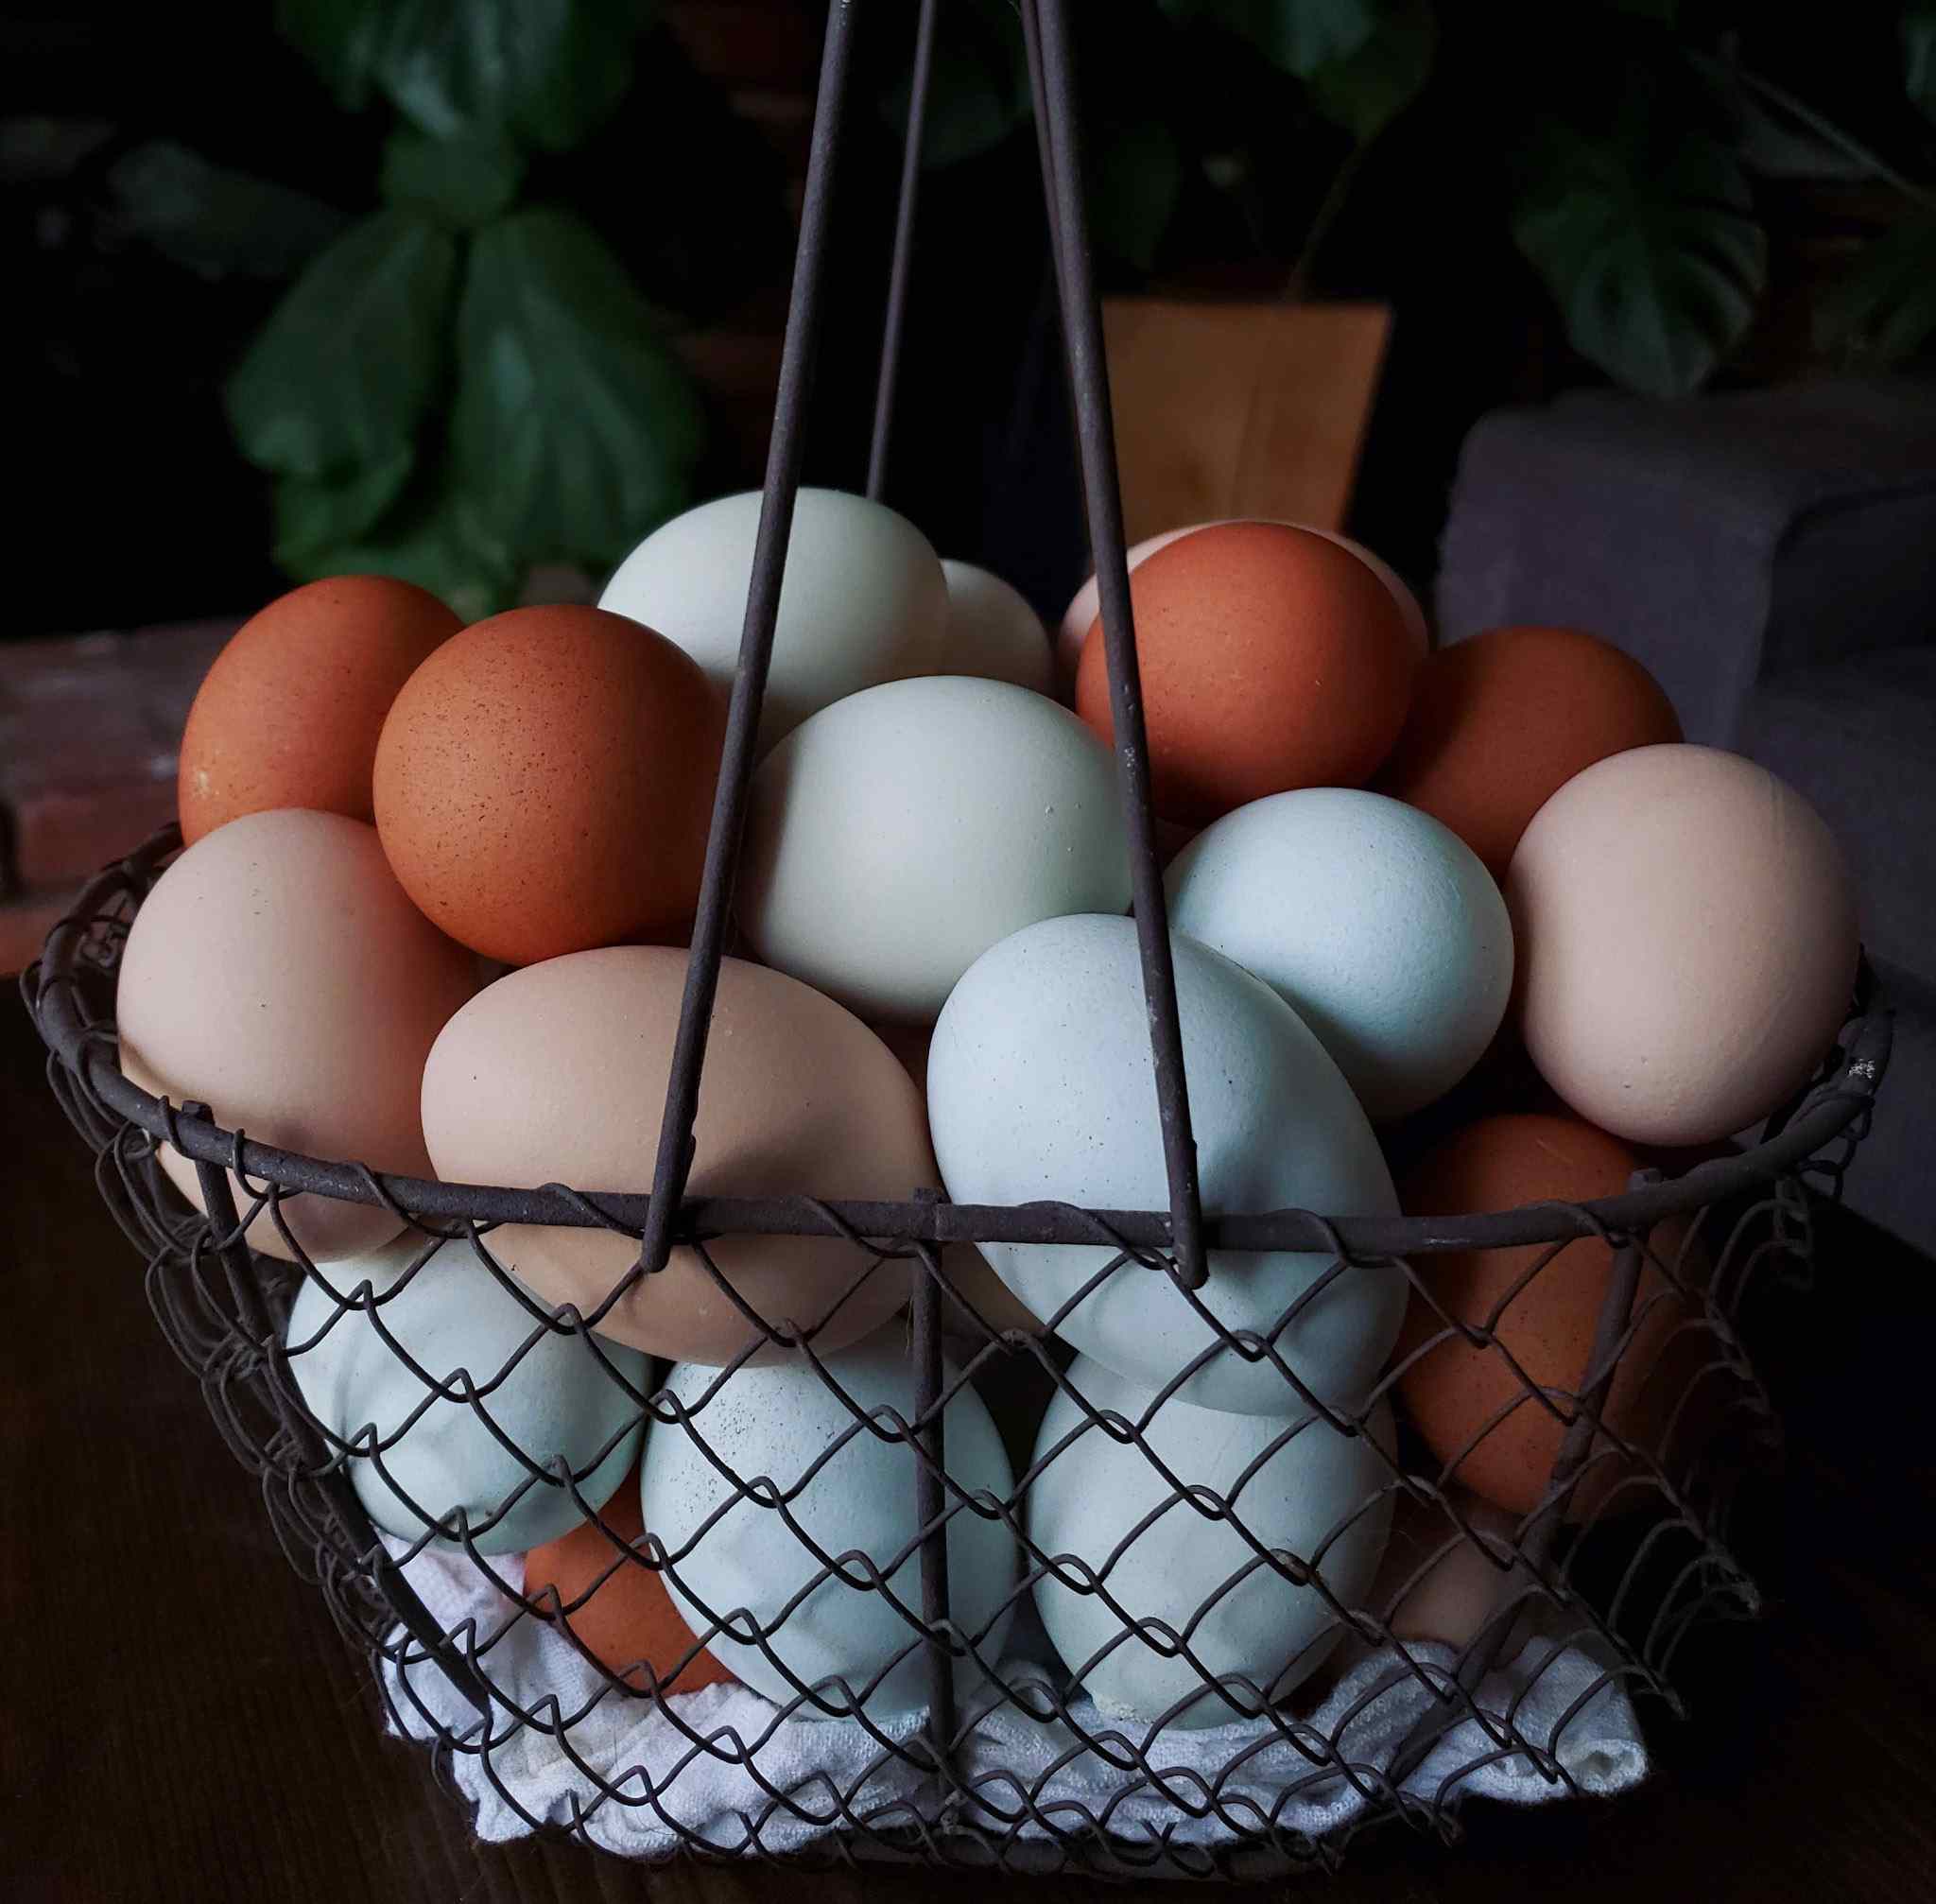 A wire basket is full of an assortment of fresh eggs. They range in color from light brown, to blue, to light green, to dark brown. 